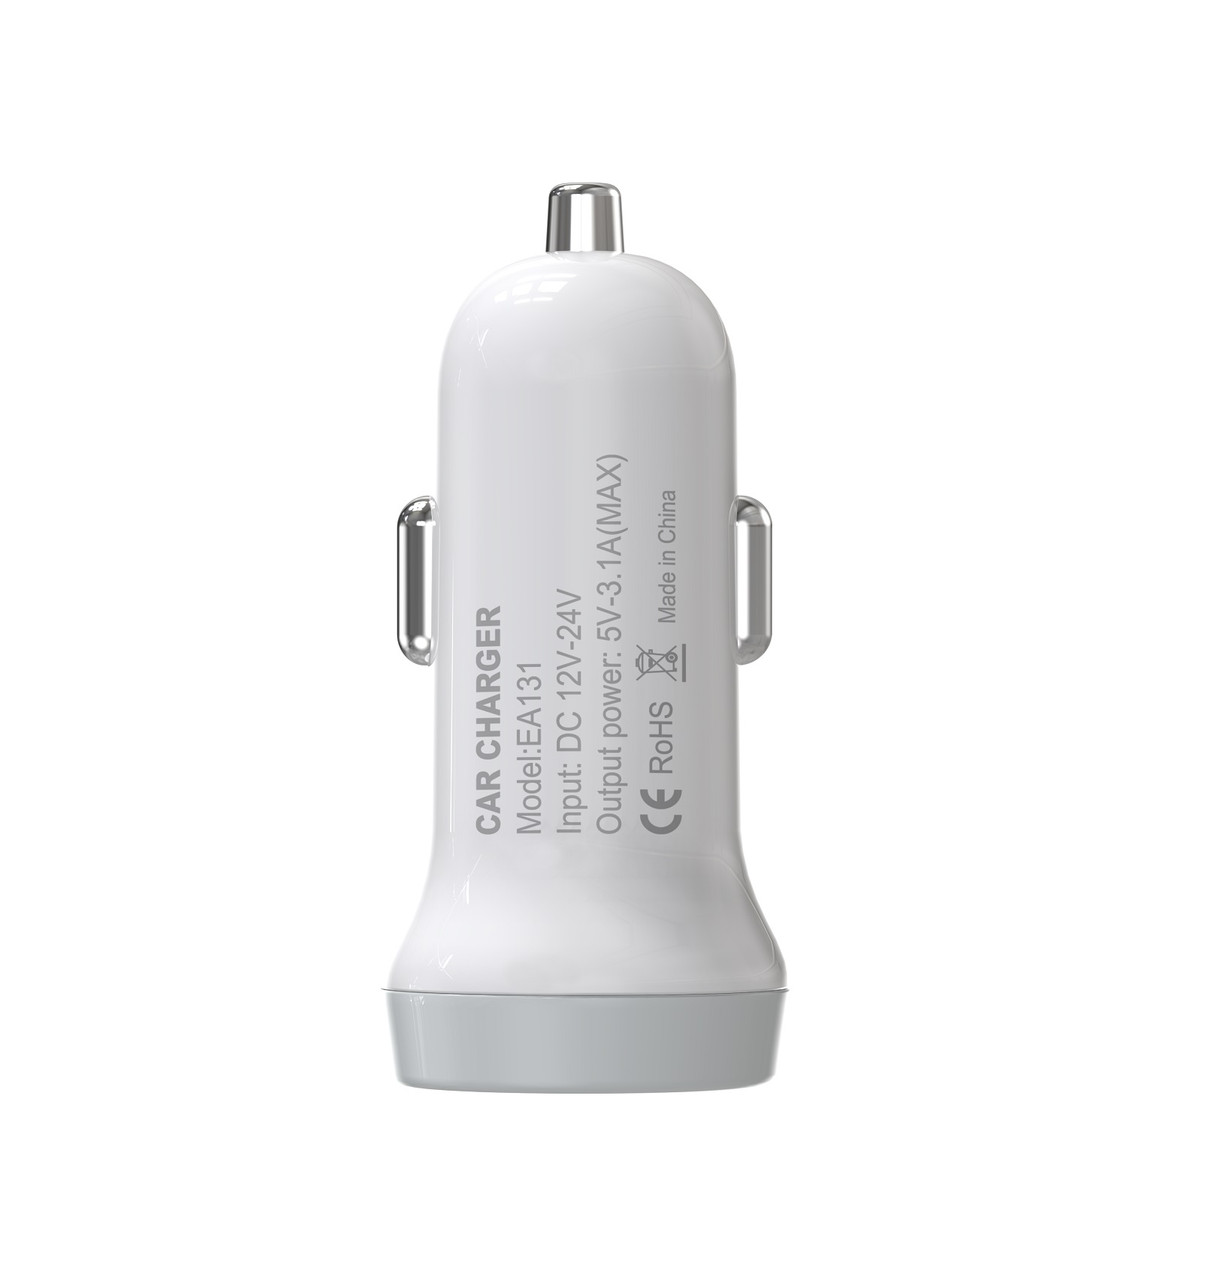 Test of Car charger 5V-3.1A Dual USB